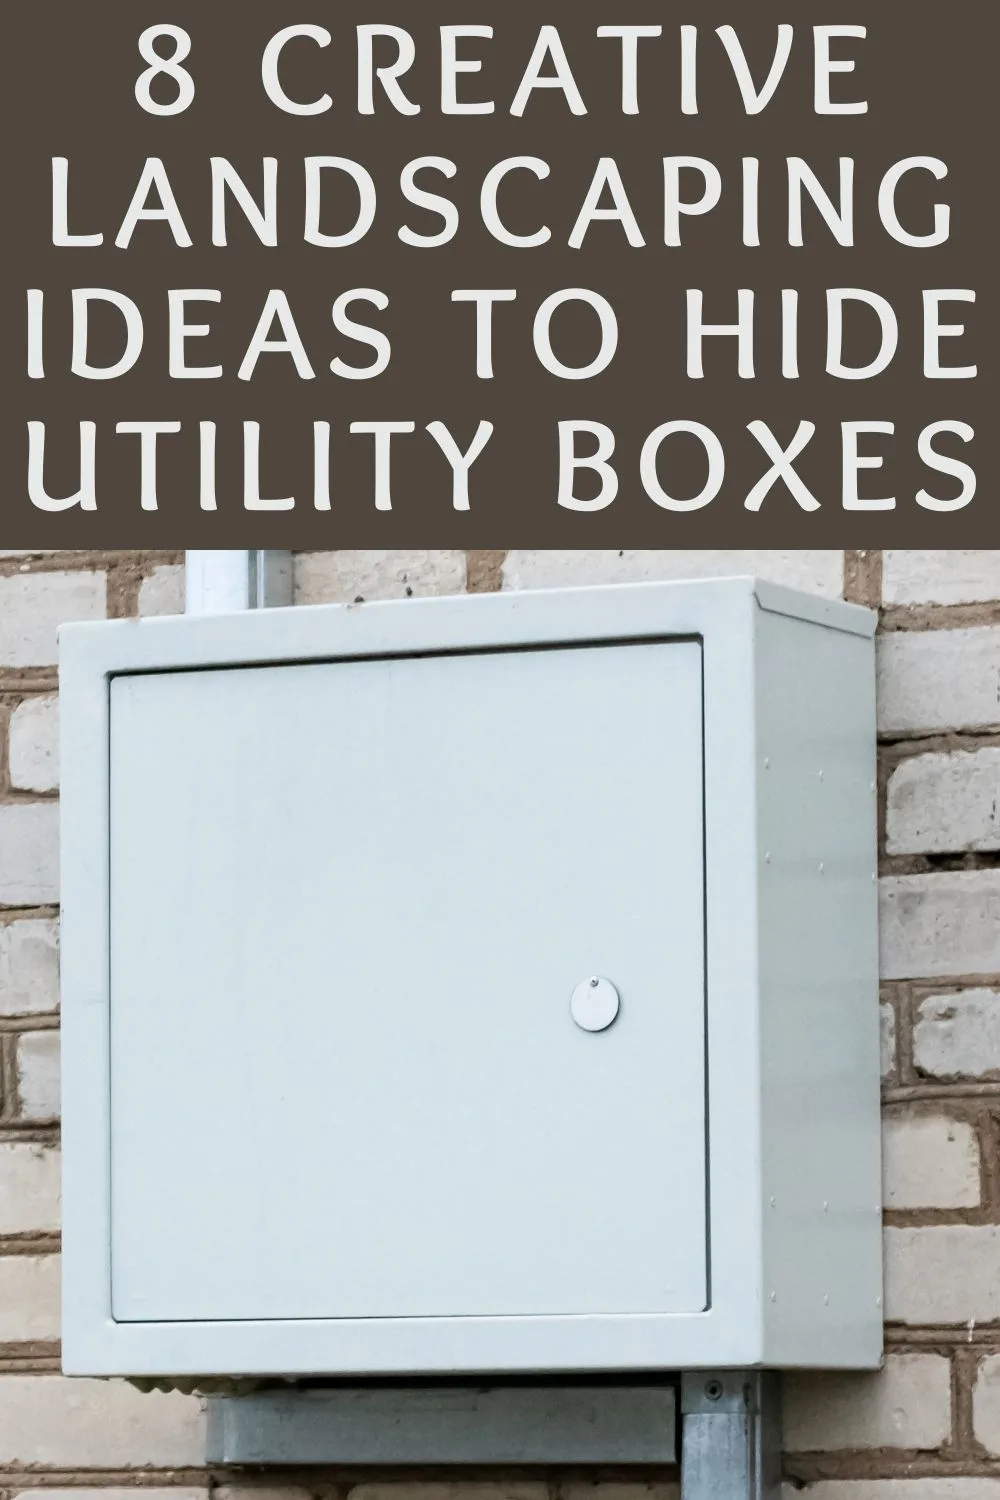 8 creative landscaping ideas to hide utility boxes